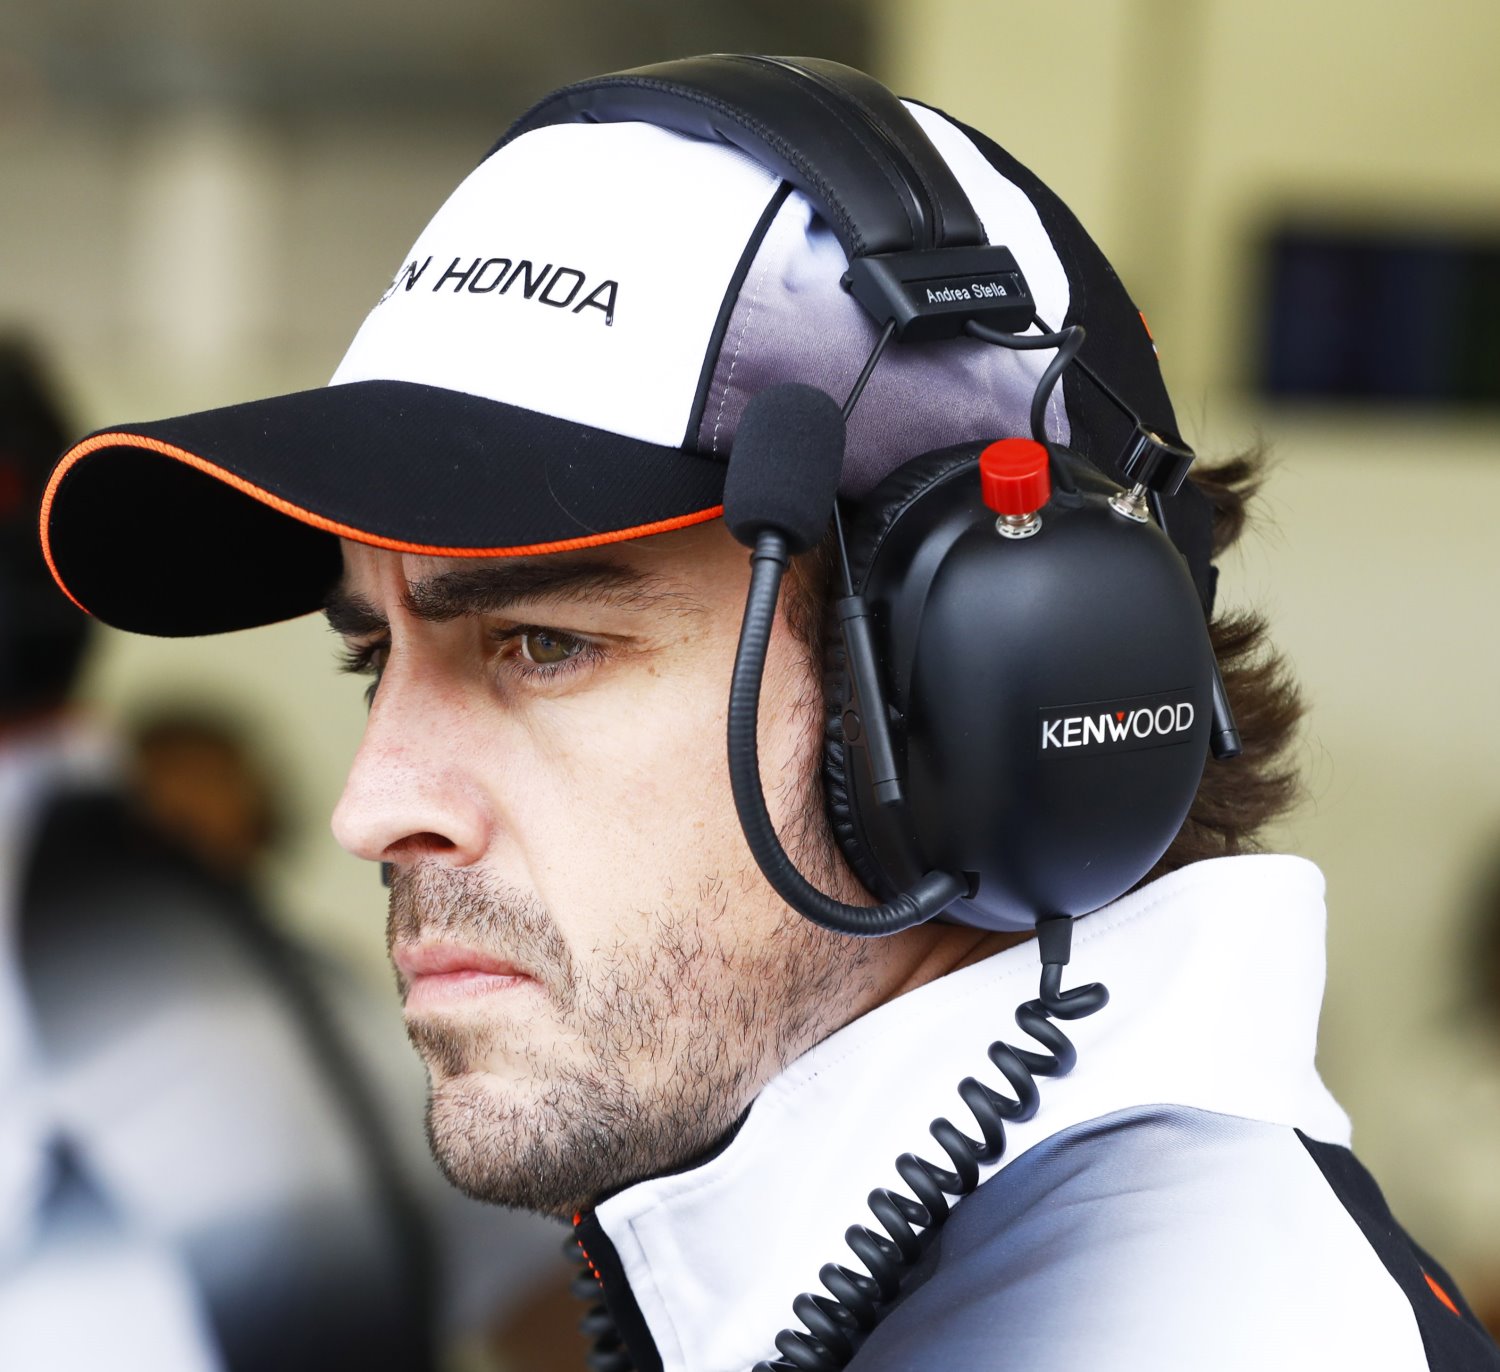 Alonso says he's motivated. It must kill him every time a Ferrari blows his doors off